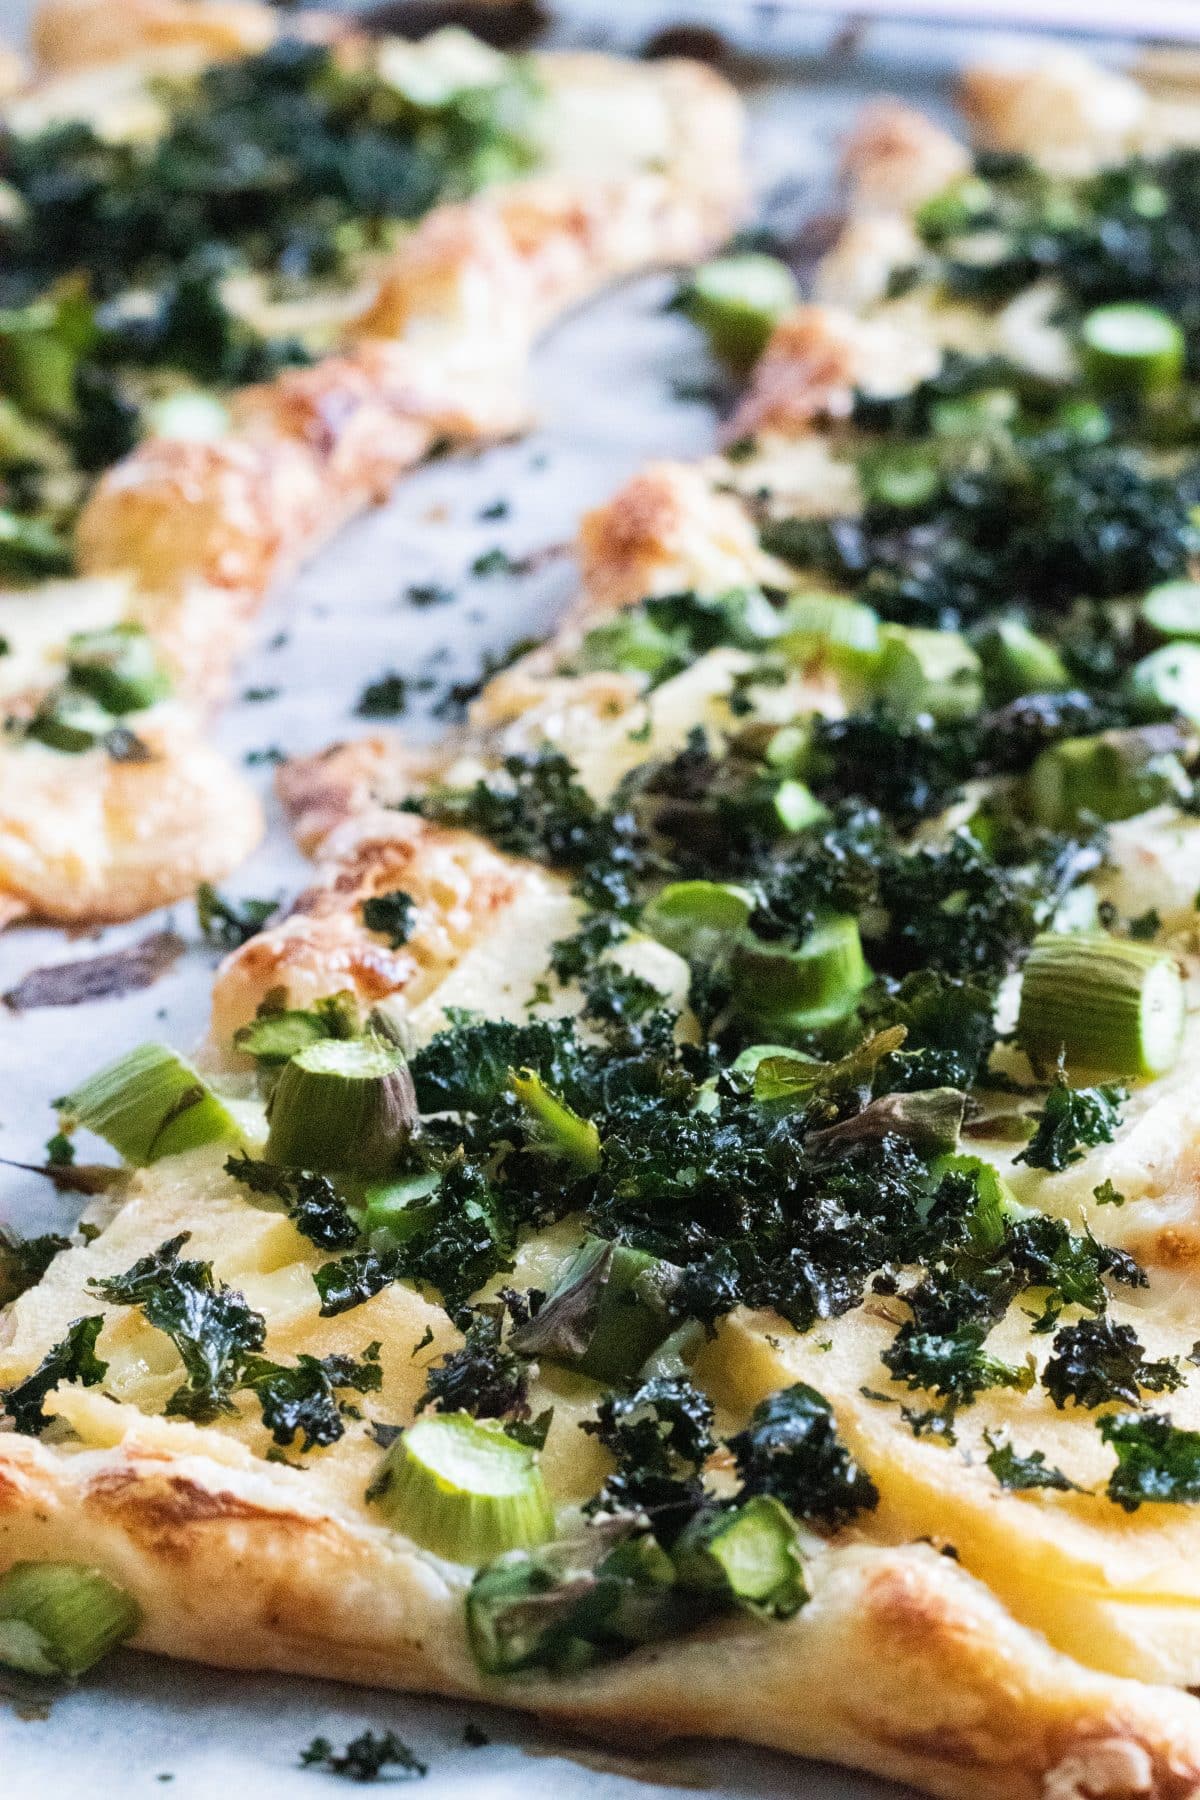 Puff Pastry Pizza with Blue Cheese, Apples & Kale Chips